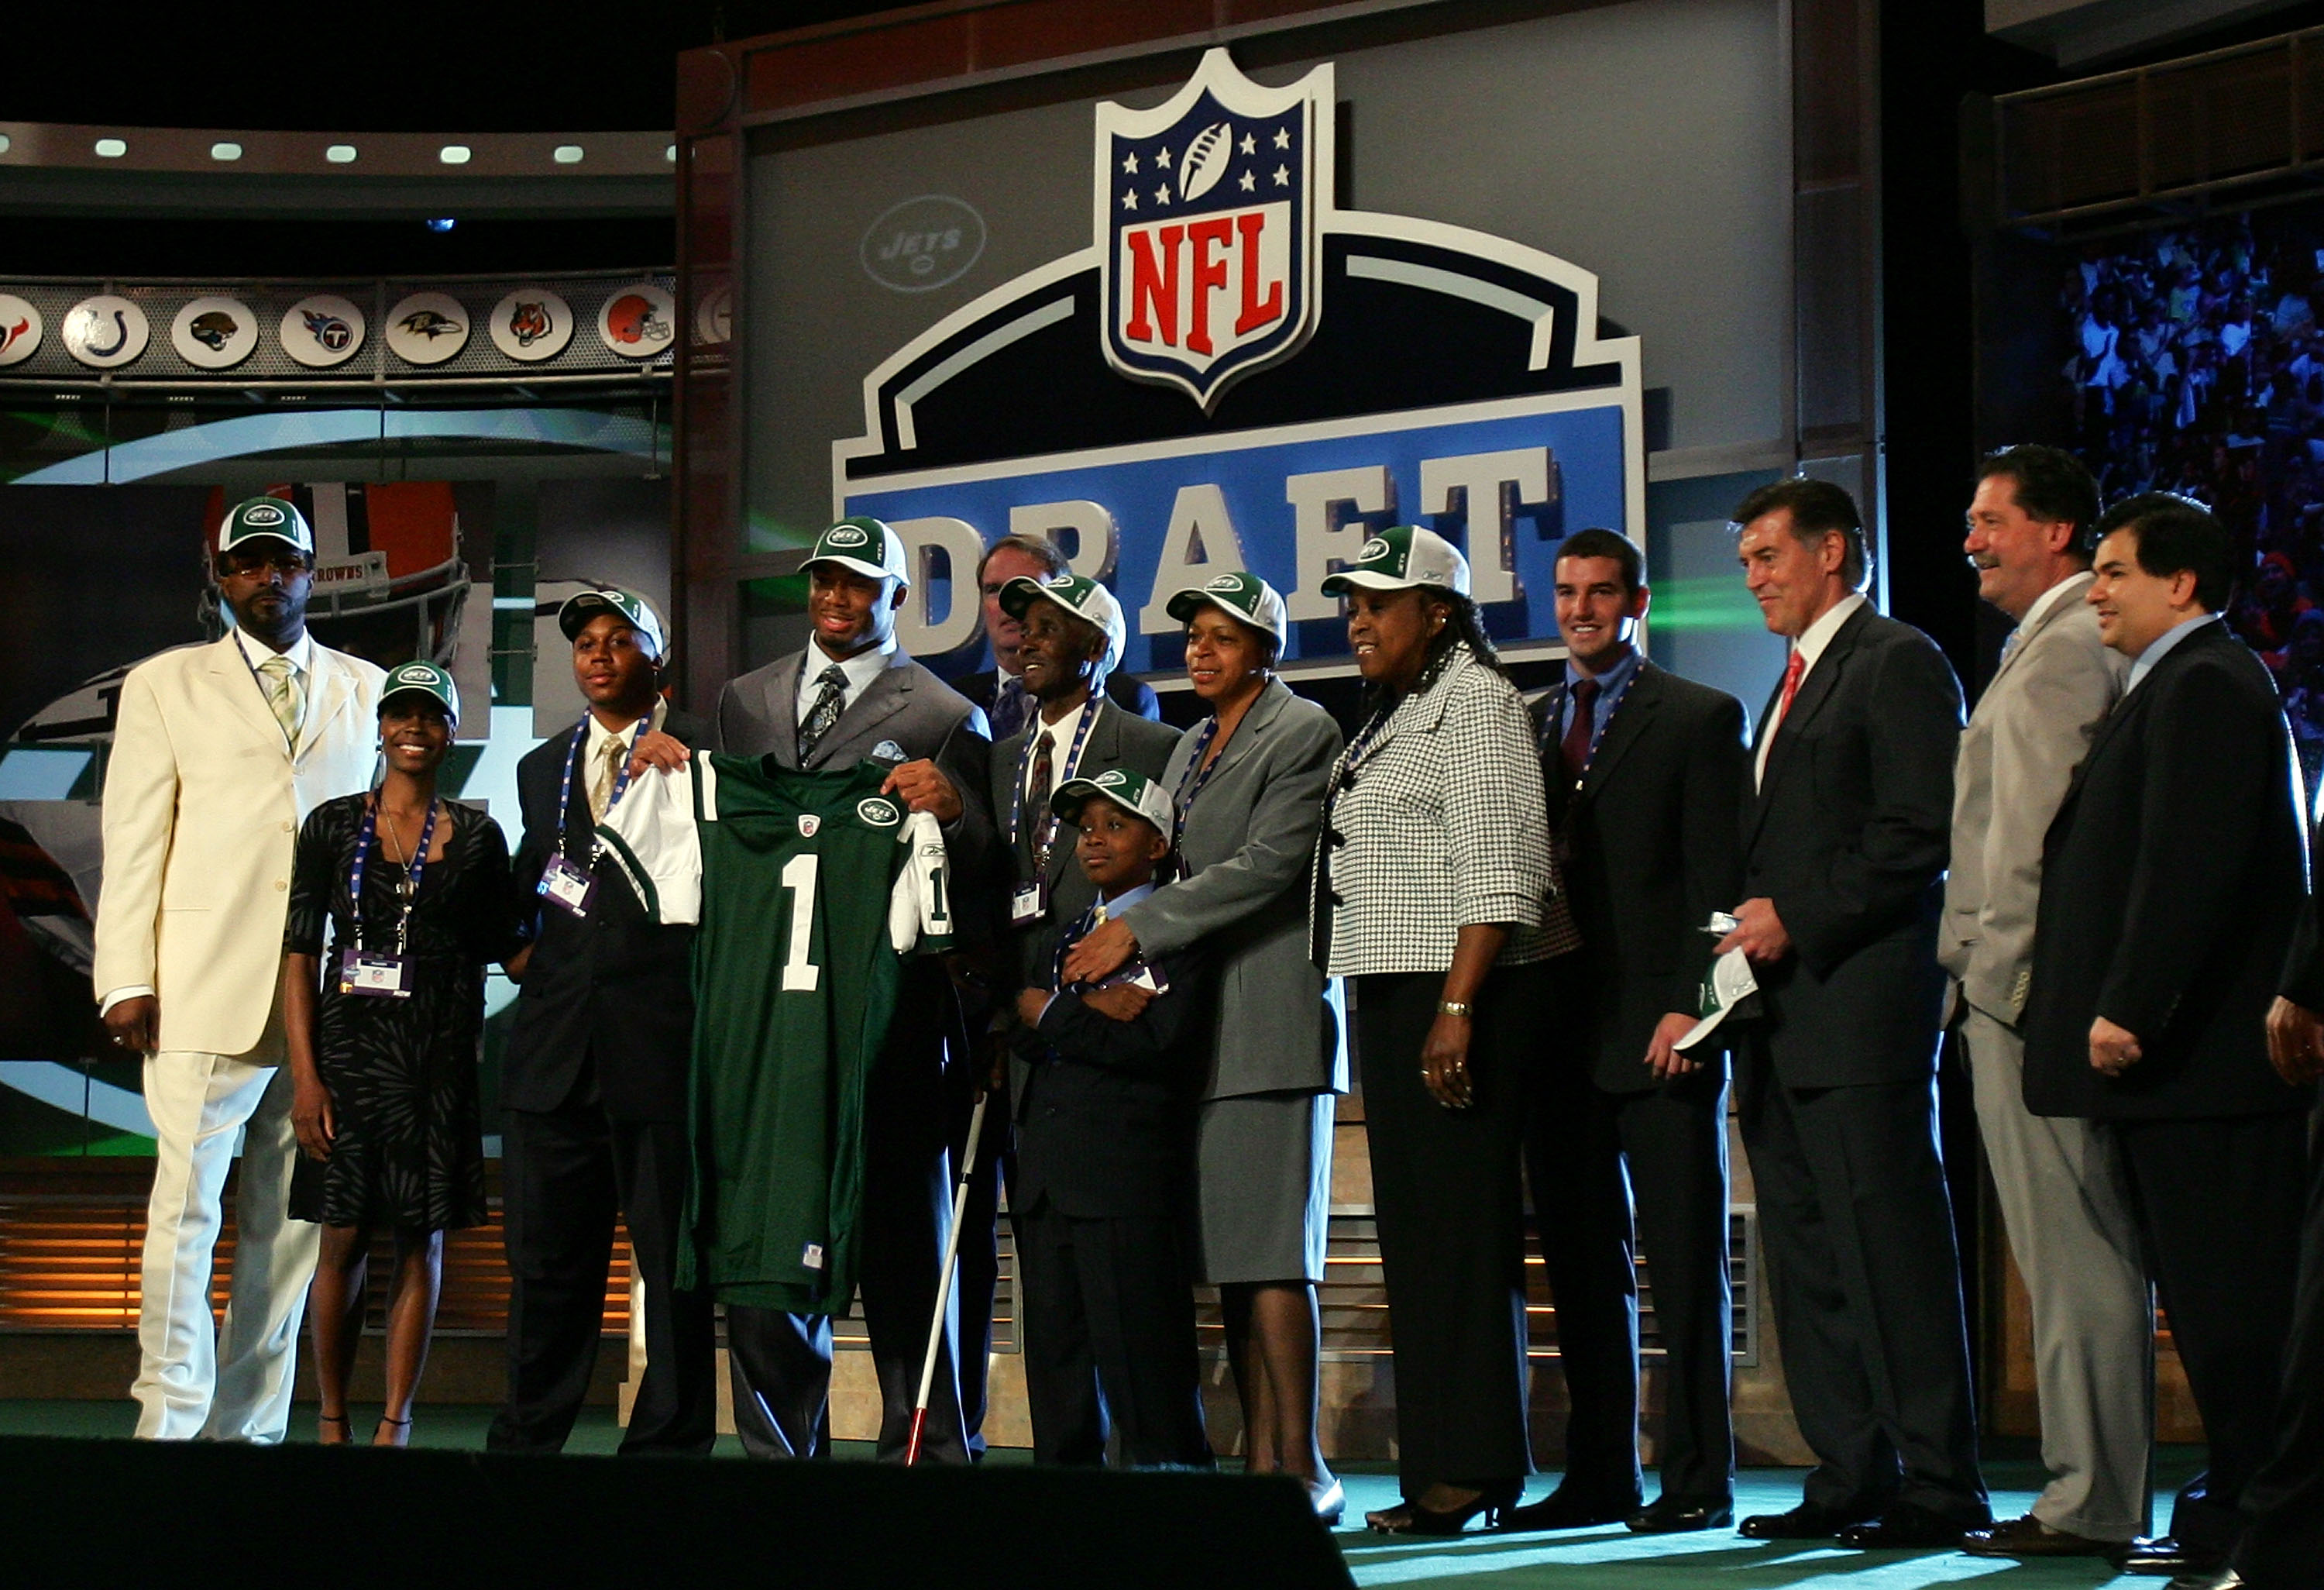 NEW YORK - APRIL 26:  Vernon Gholston poses for a photo after being selected as the sixth overall pick by the New York Jets with family and friends during the 2008 NFL Draft on April 26, 2008 at Radio City Music Hall in New York City.  (Photo by Jim McIsa